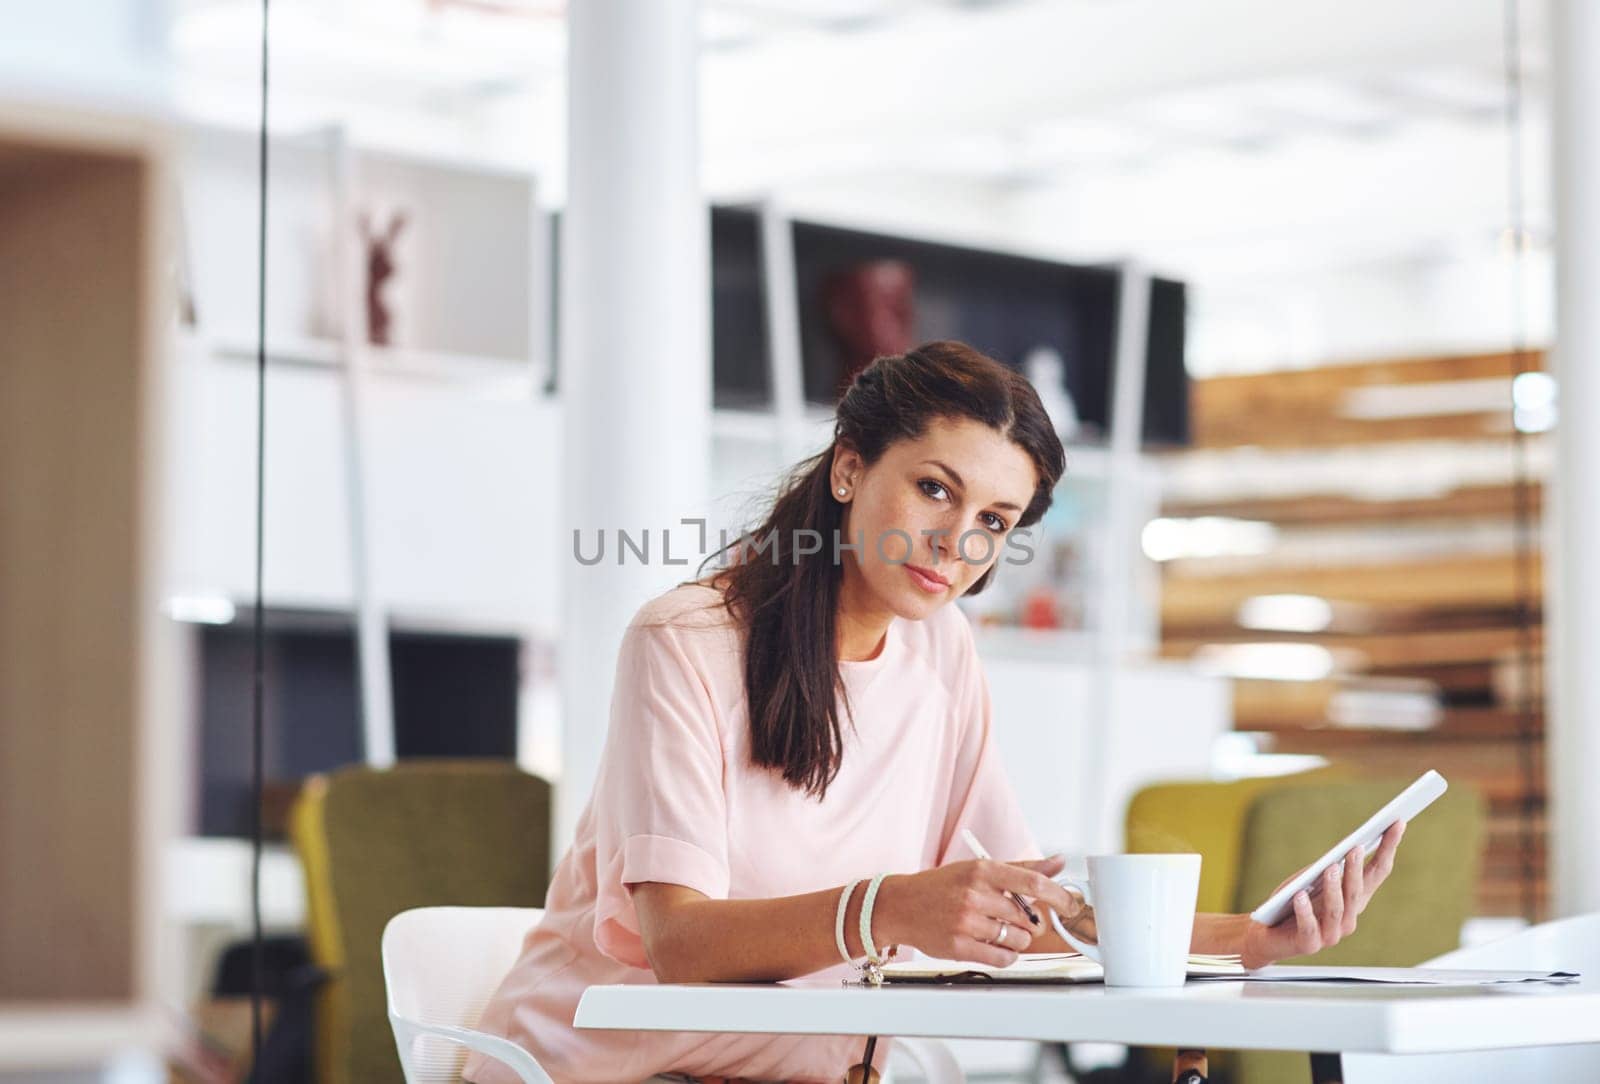 This tablet has really made business easy. Cropped portrait of a young businsswoman using a digital tablet at her desk in the office. by YuriArcurs